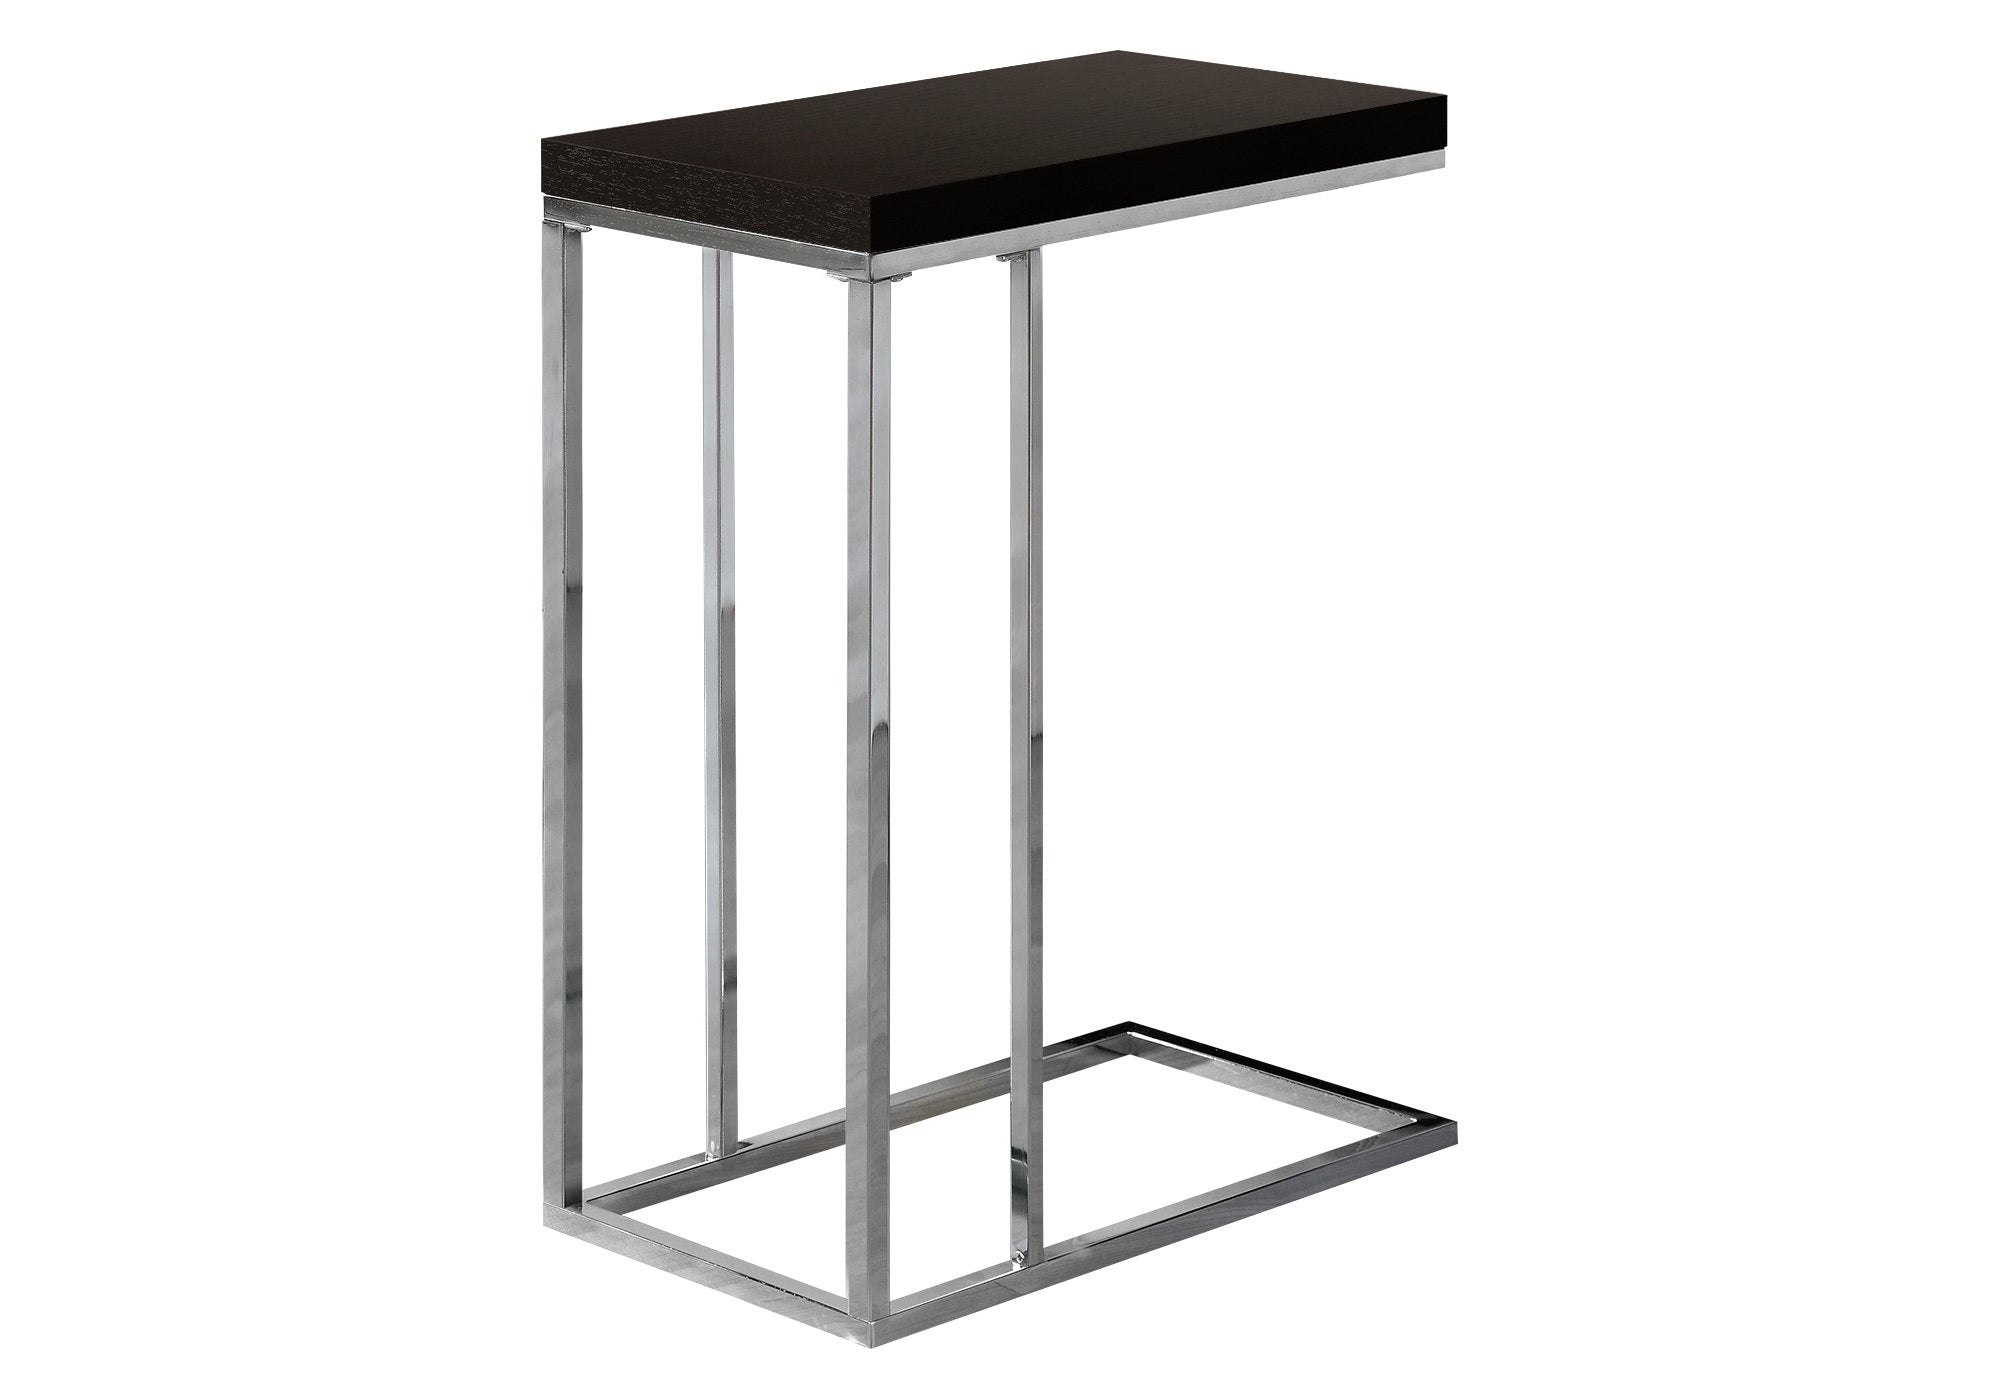 MN-753007    Accent Table, C-Shaped, End, Side, Snack, Living Room, Bedroom, Metal Legs, Laminate, Dark Brown, Chrome, Contemporary, Modern